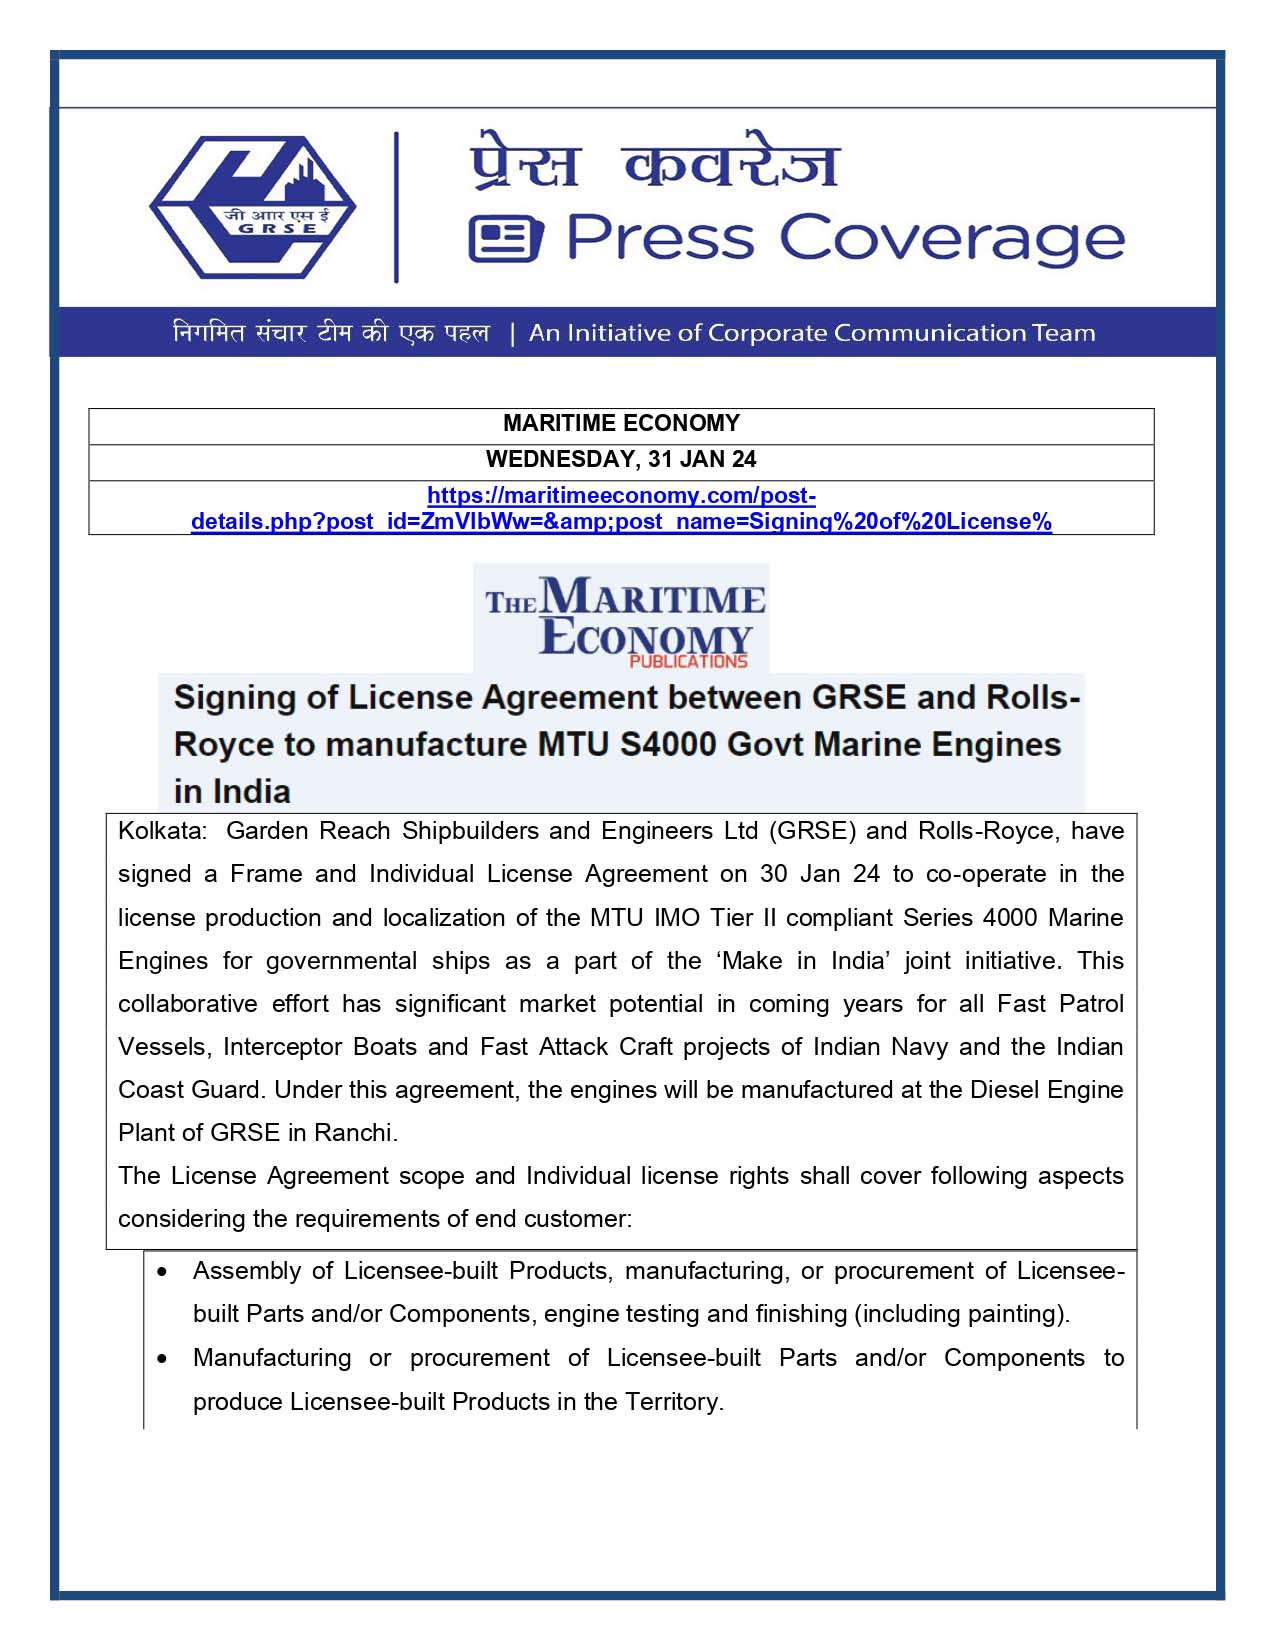 Press Coverage : Maritime Economy, 31 Jan 24 : Signing of License Agreement between GRSE and Rolls-Royce to manufacture MTU S4000 Govt Marine Engines in India